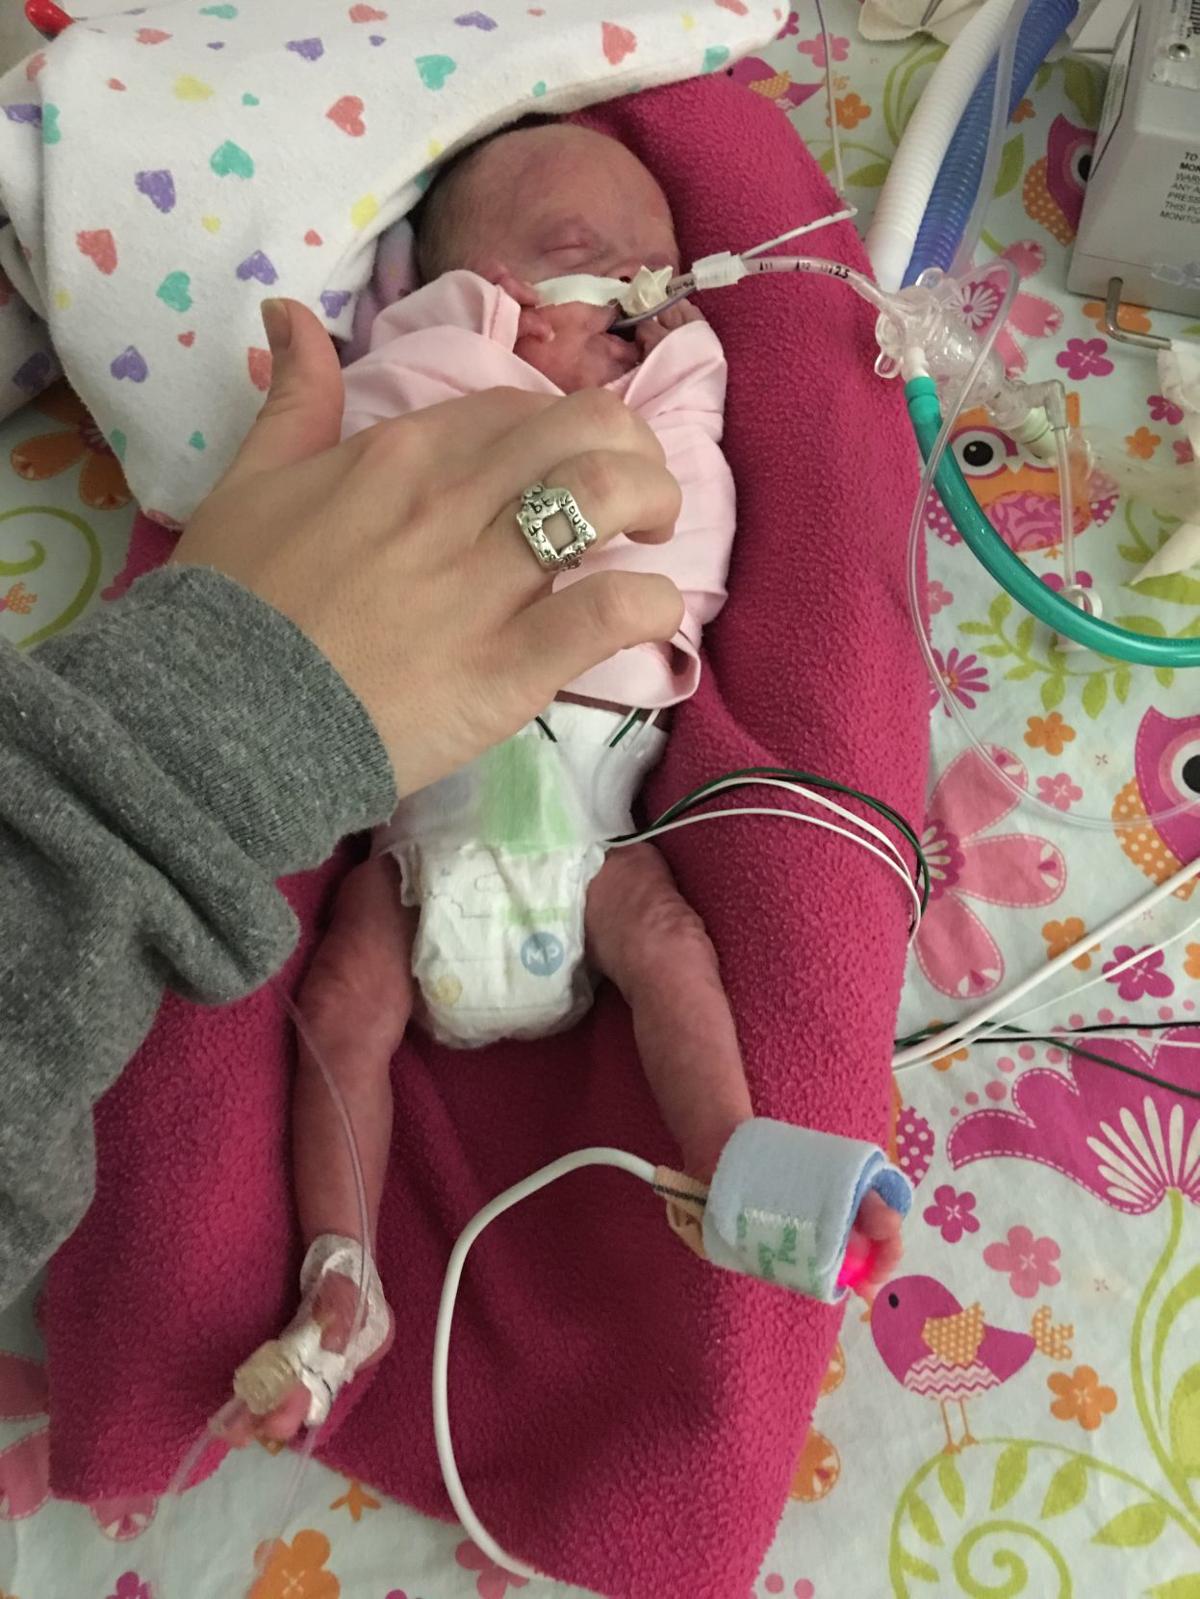 Dysart Miracle Twins Born 18 Weeks Premature Making History With Photos Iowa And The 